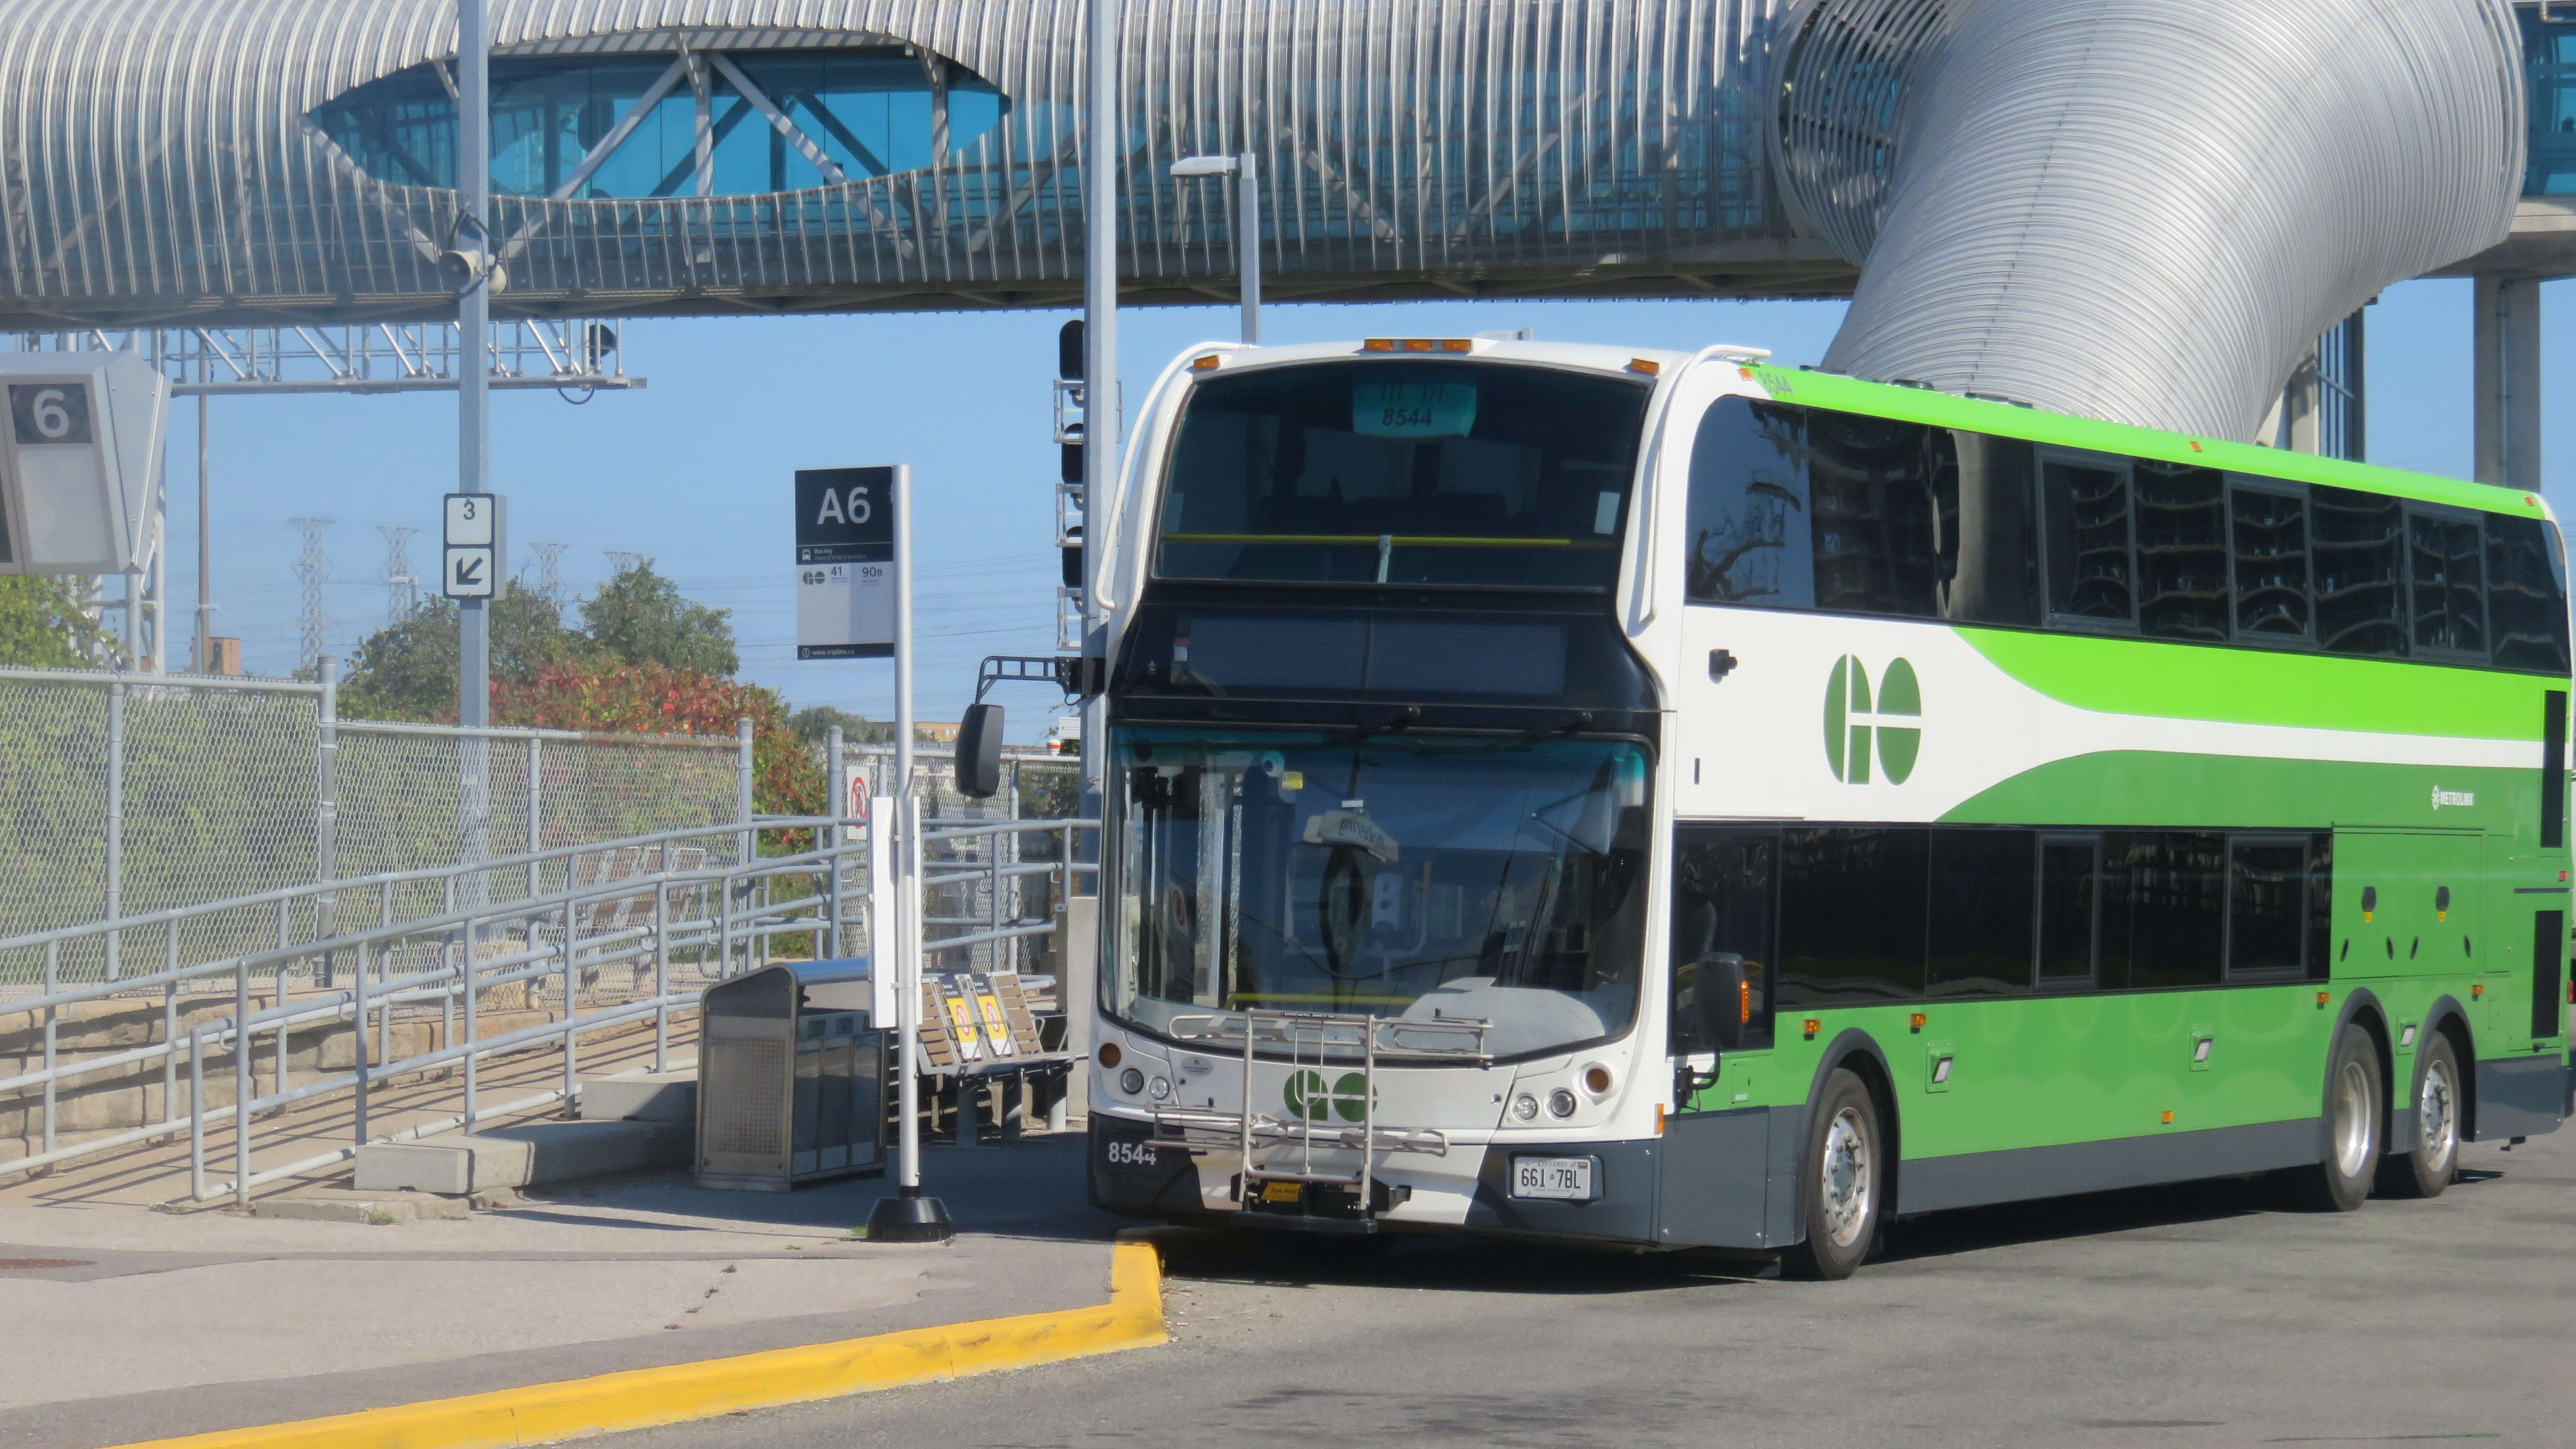 GO bus with pickering bridge in the background